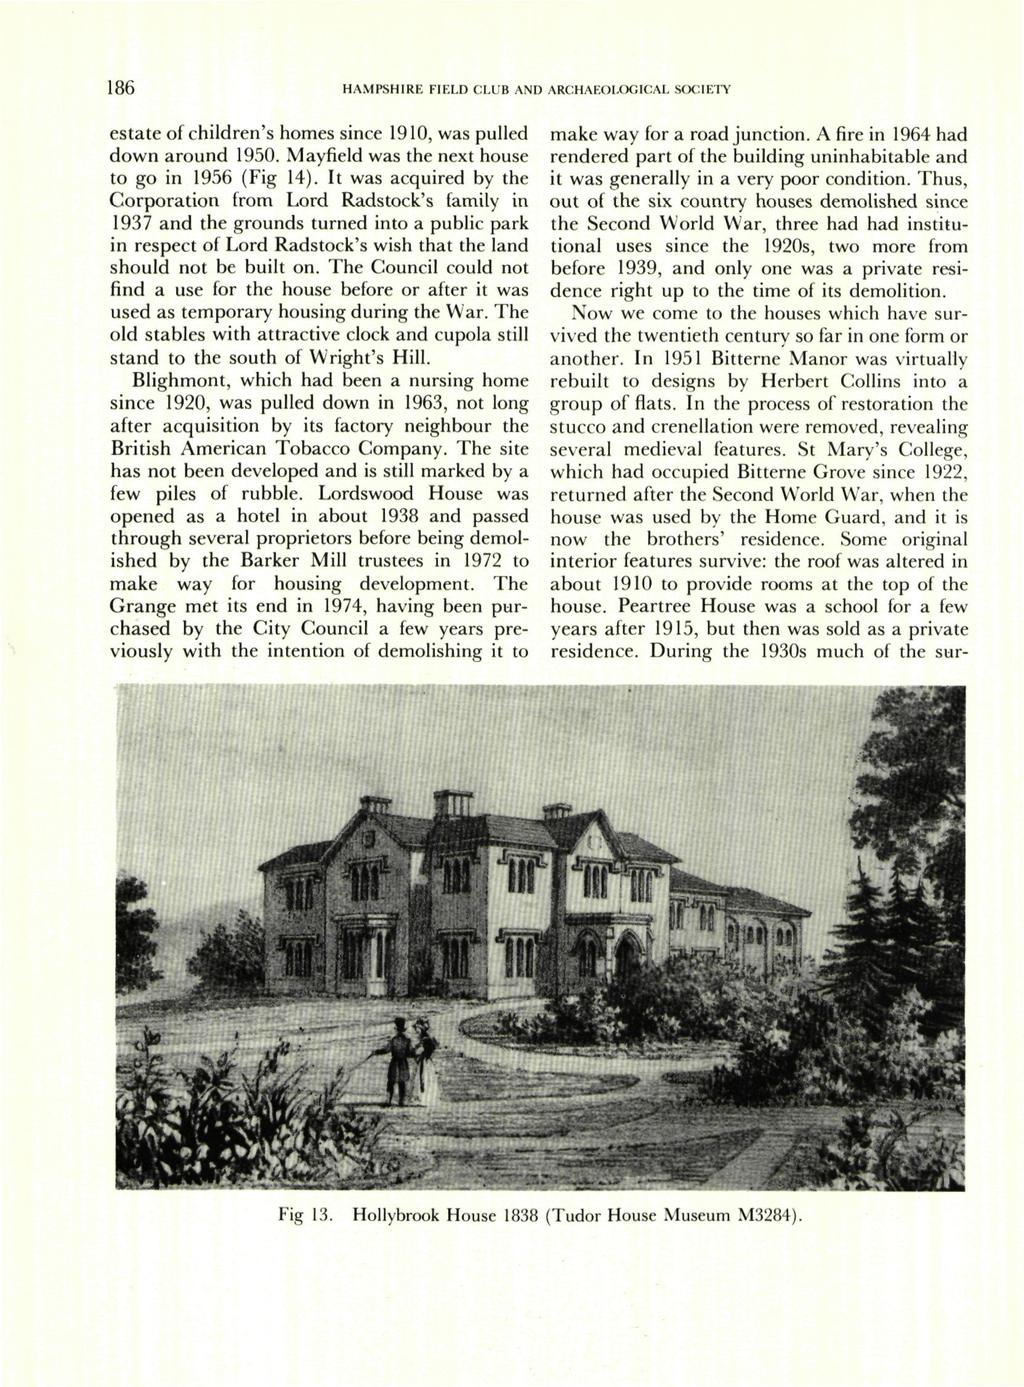 186 HAMPSHIRE FIELD CLUB AND ARCHAEOLOGICAL S(X:IETY estate of children's homes since 1910, was pulled down around 1950. Mayfield was the next house to go in 1956 (Fig 14).